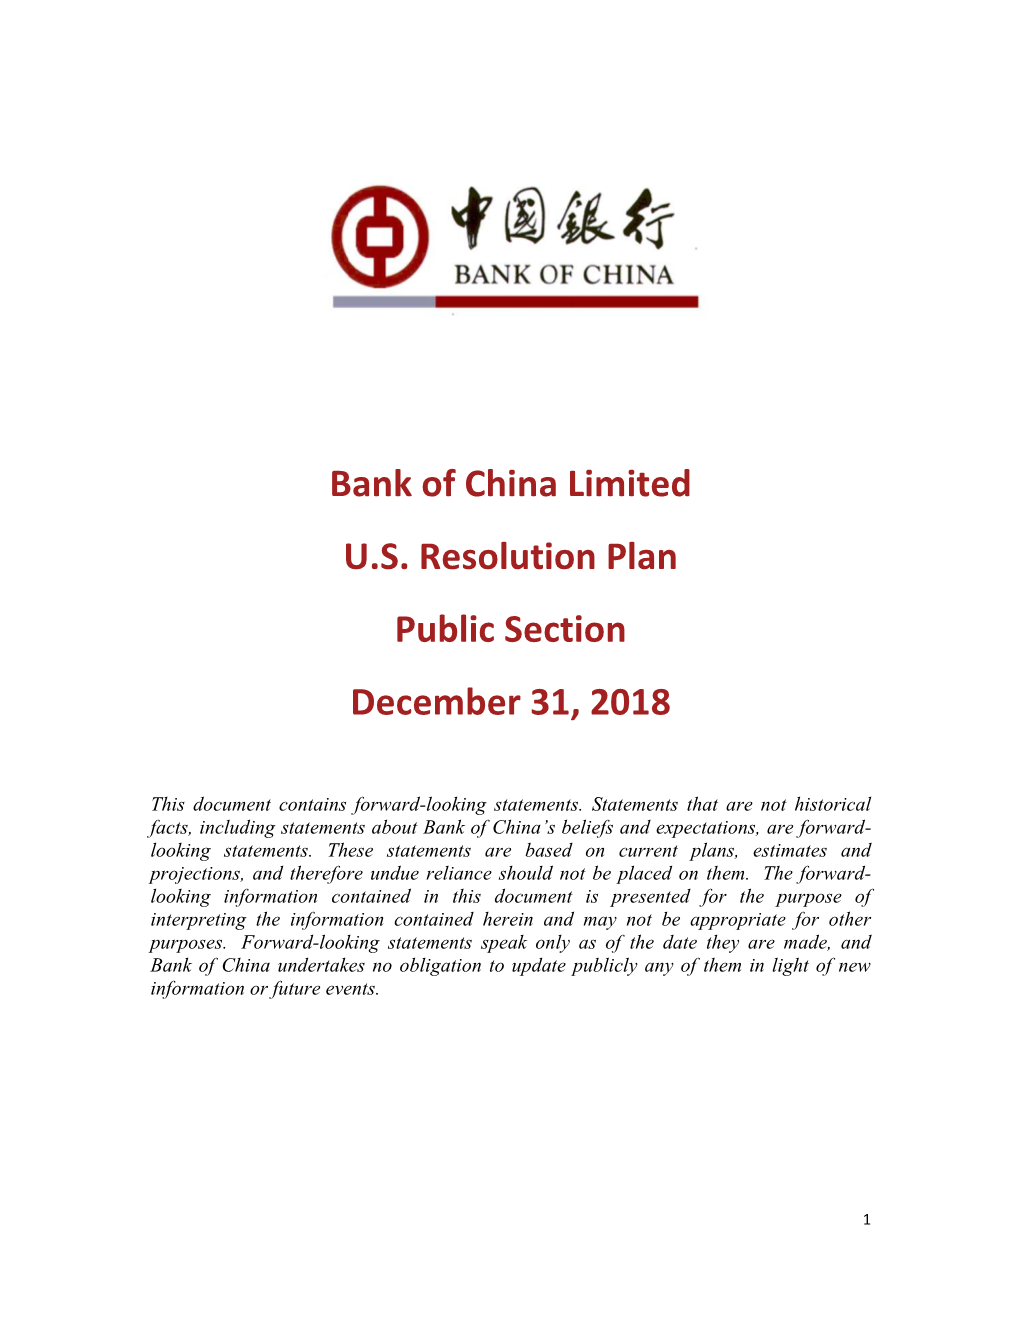 Bank of China Limited US Resolution Plan Public Section December 31, 2018